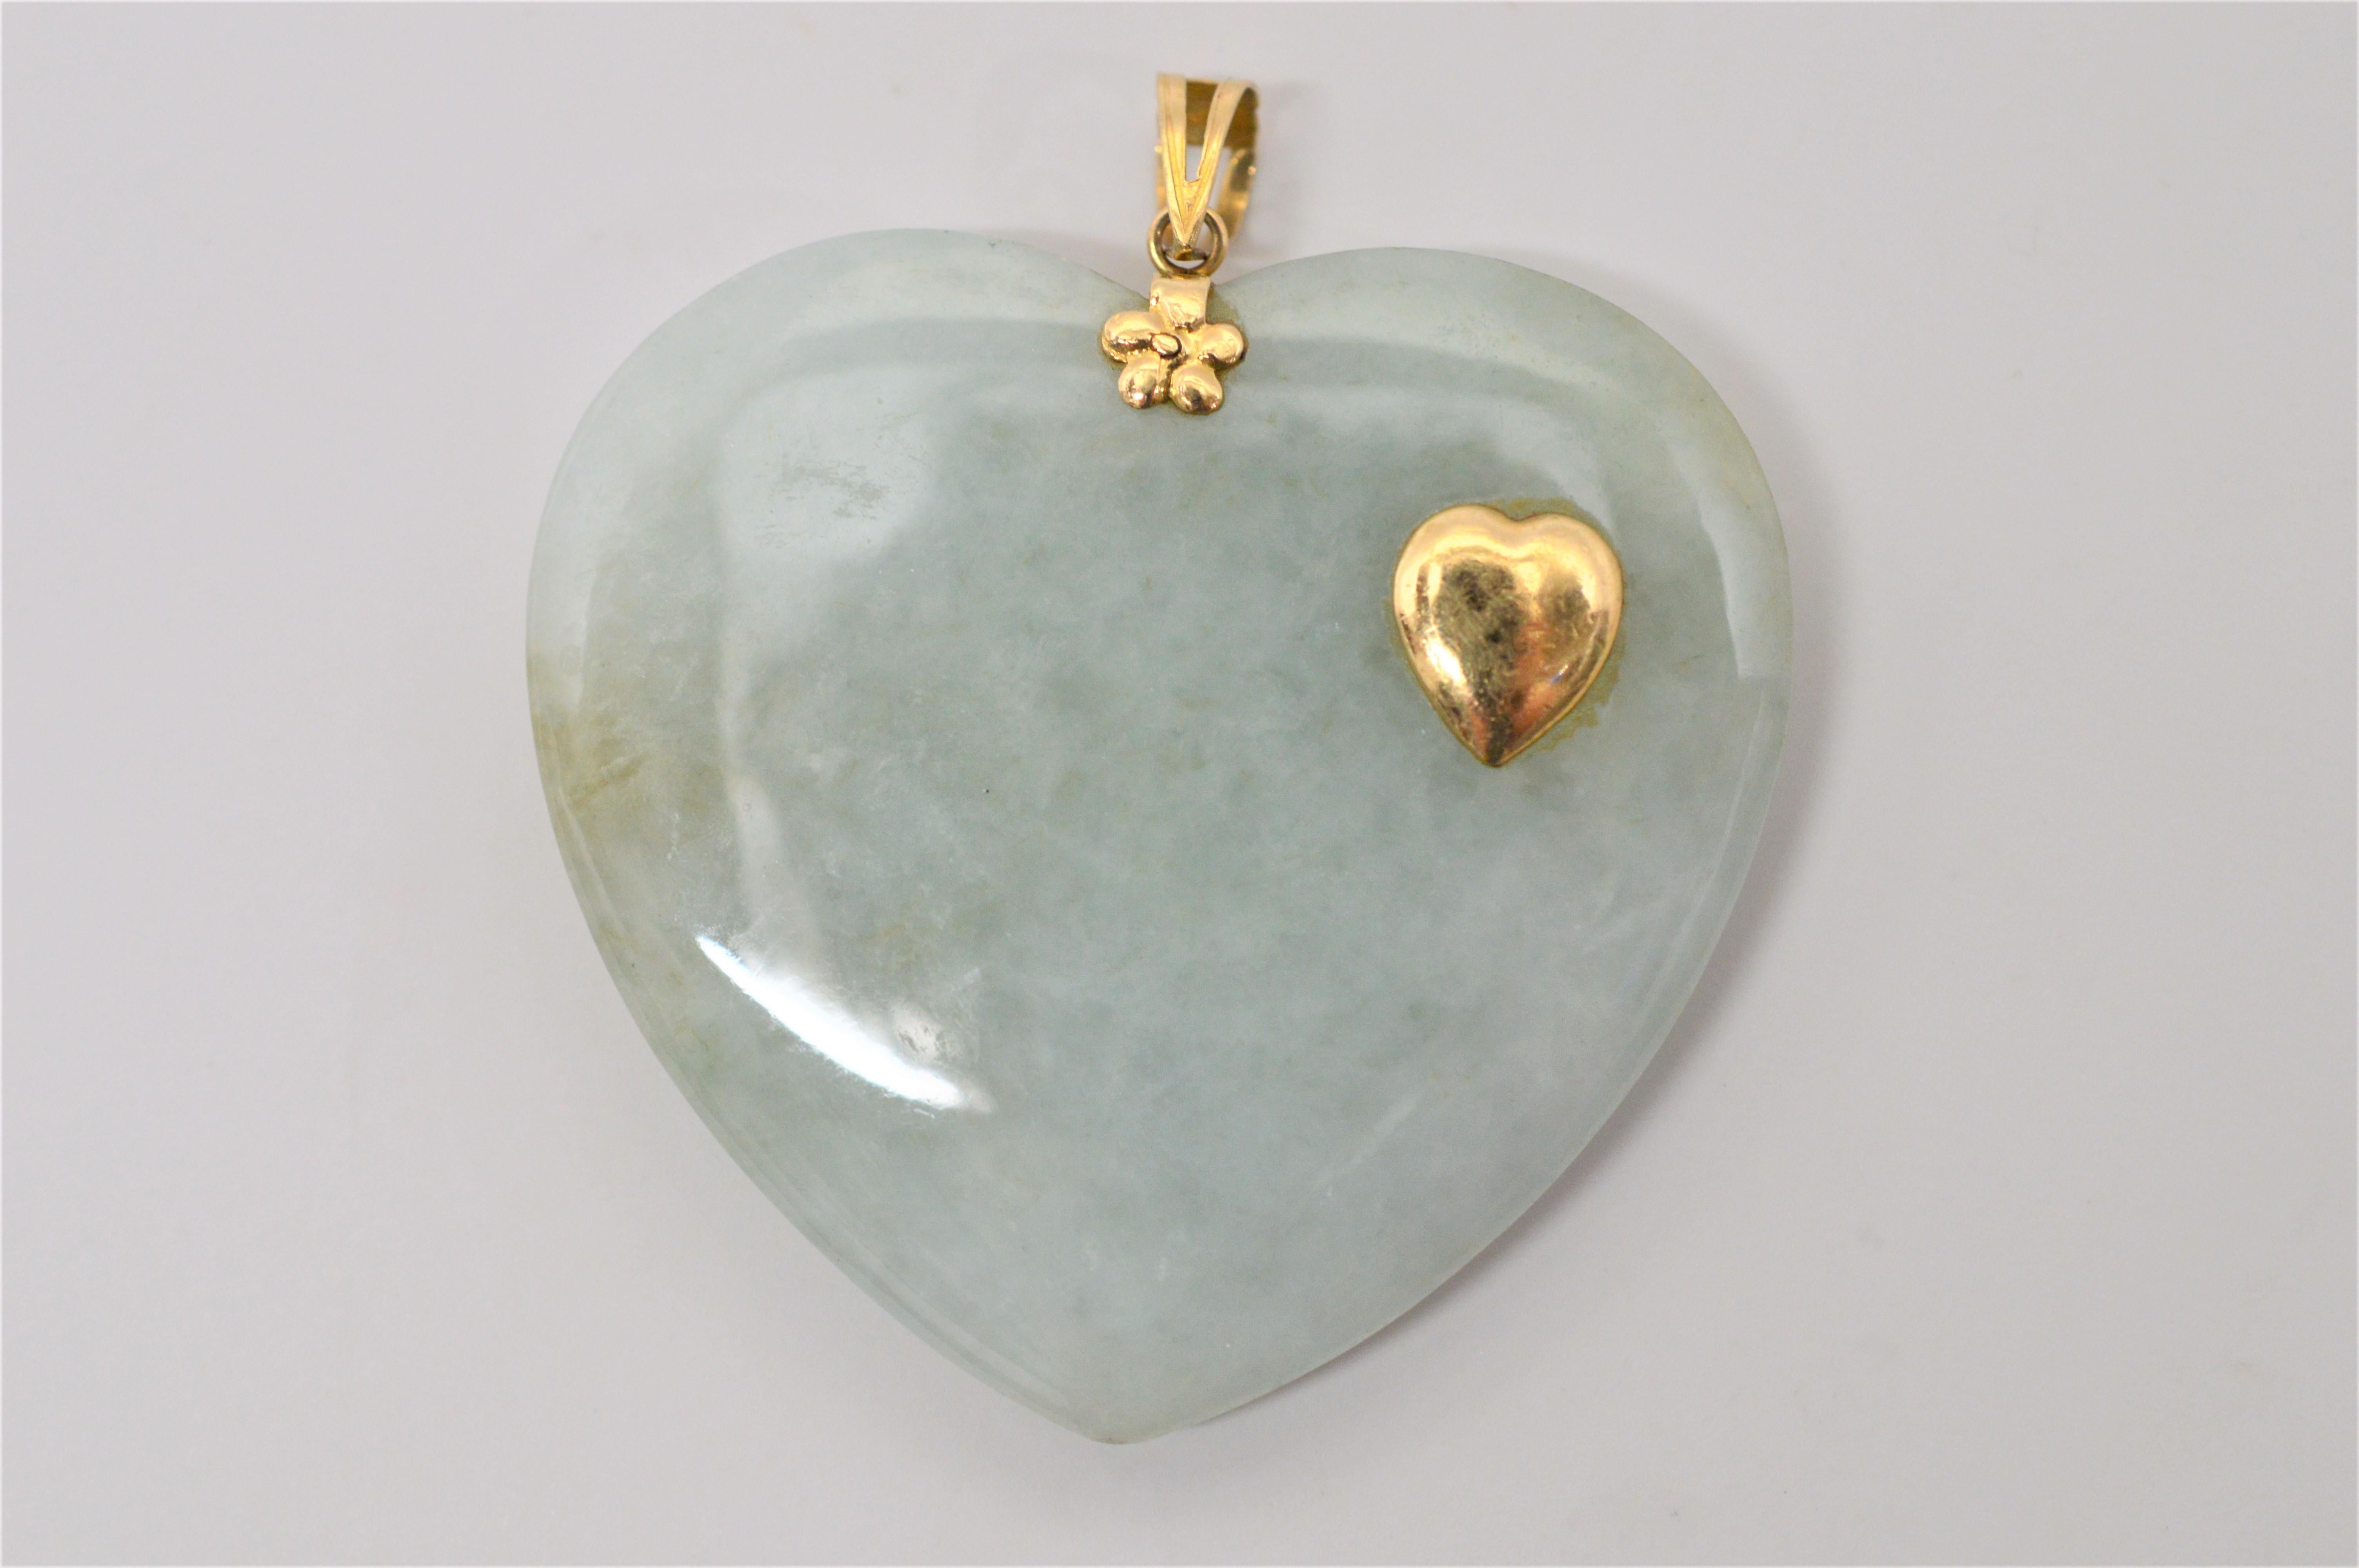 Fine and unusual, this Jade Heart  Pendant is made of beautiful natural white jade with soft green hues. Enhancing the serene piece is a small accent heart and decorative findings of 14 Karat Yellow Gold. The reverse side is polished and can also be